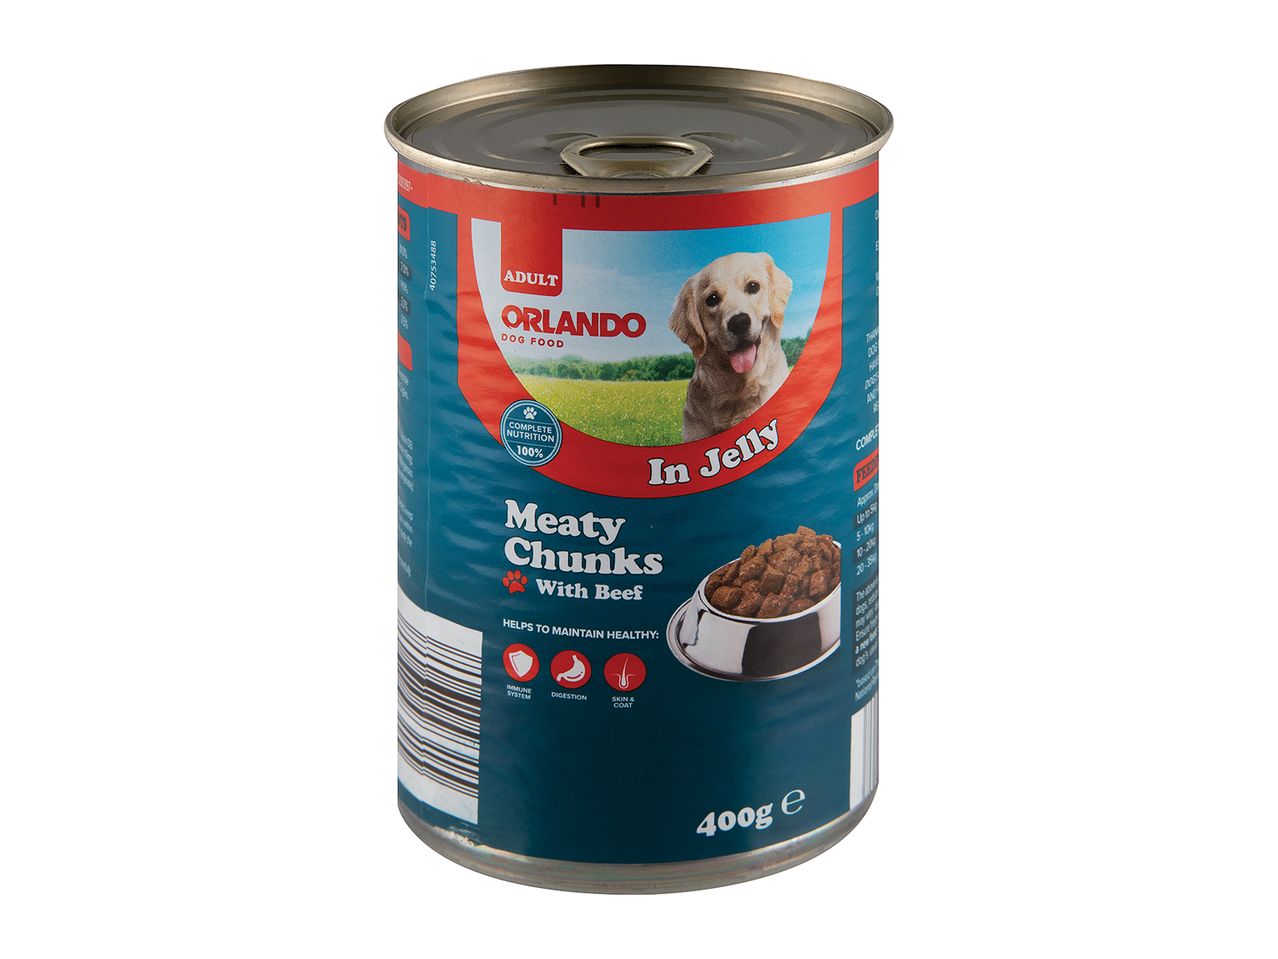 Go to full screen view: Orlando Dog Food Can - Image 2